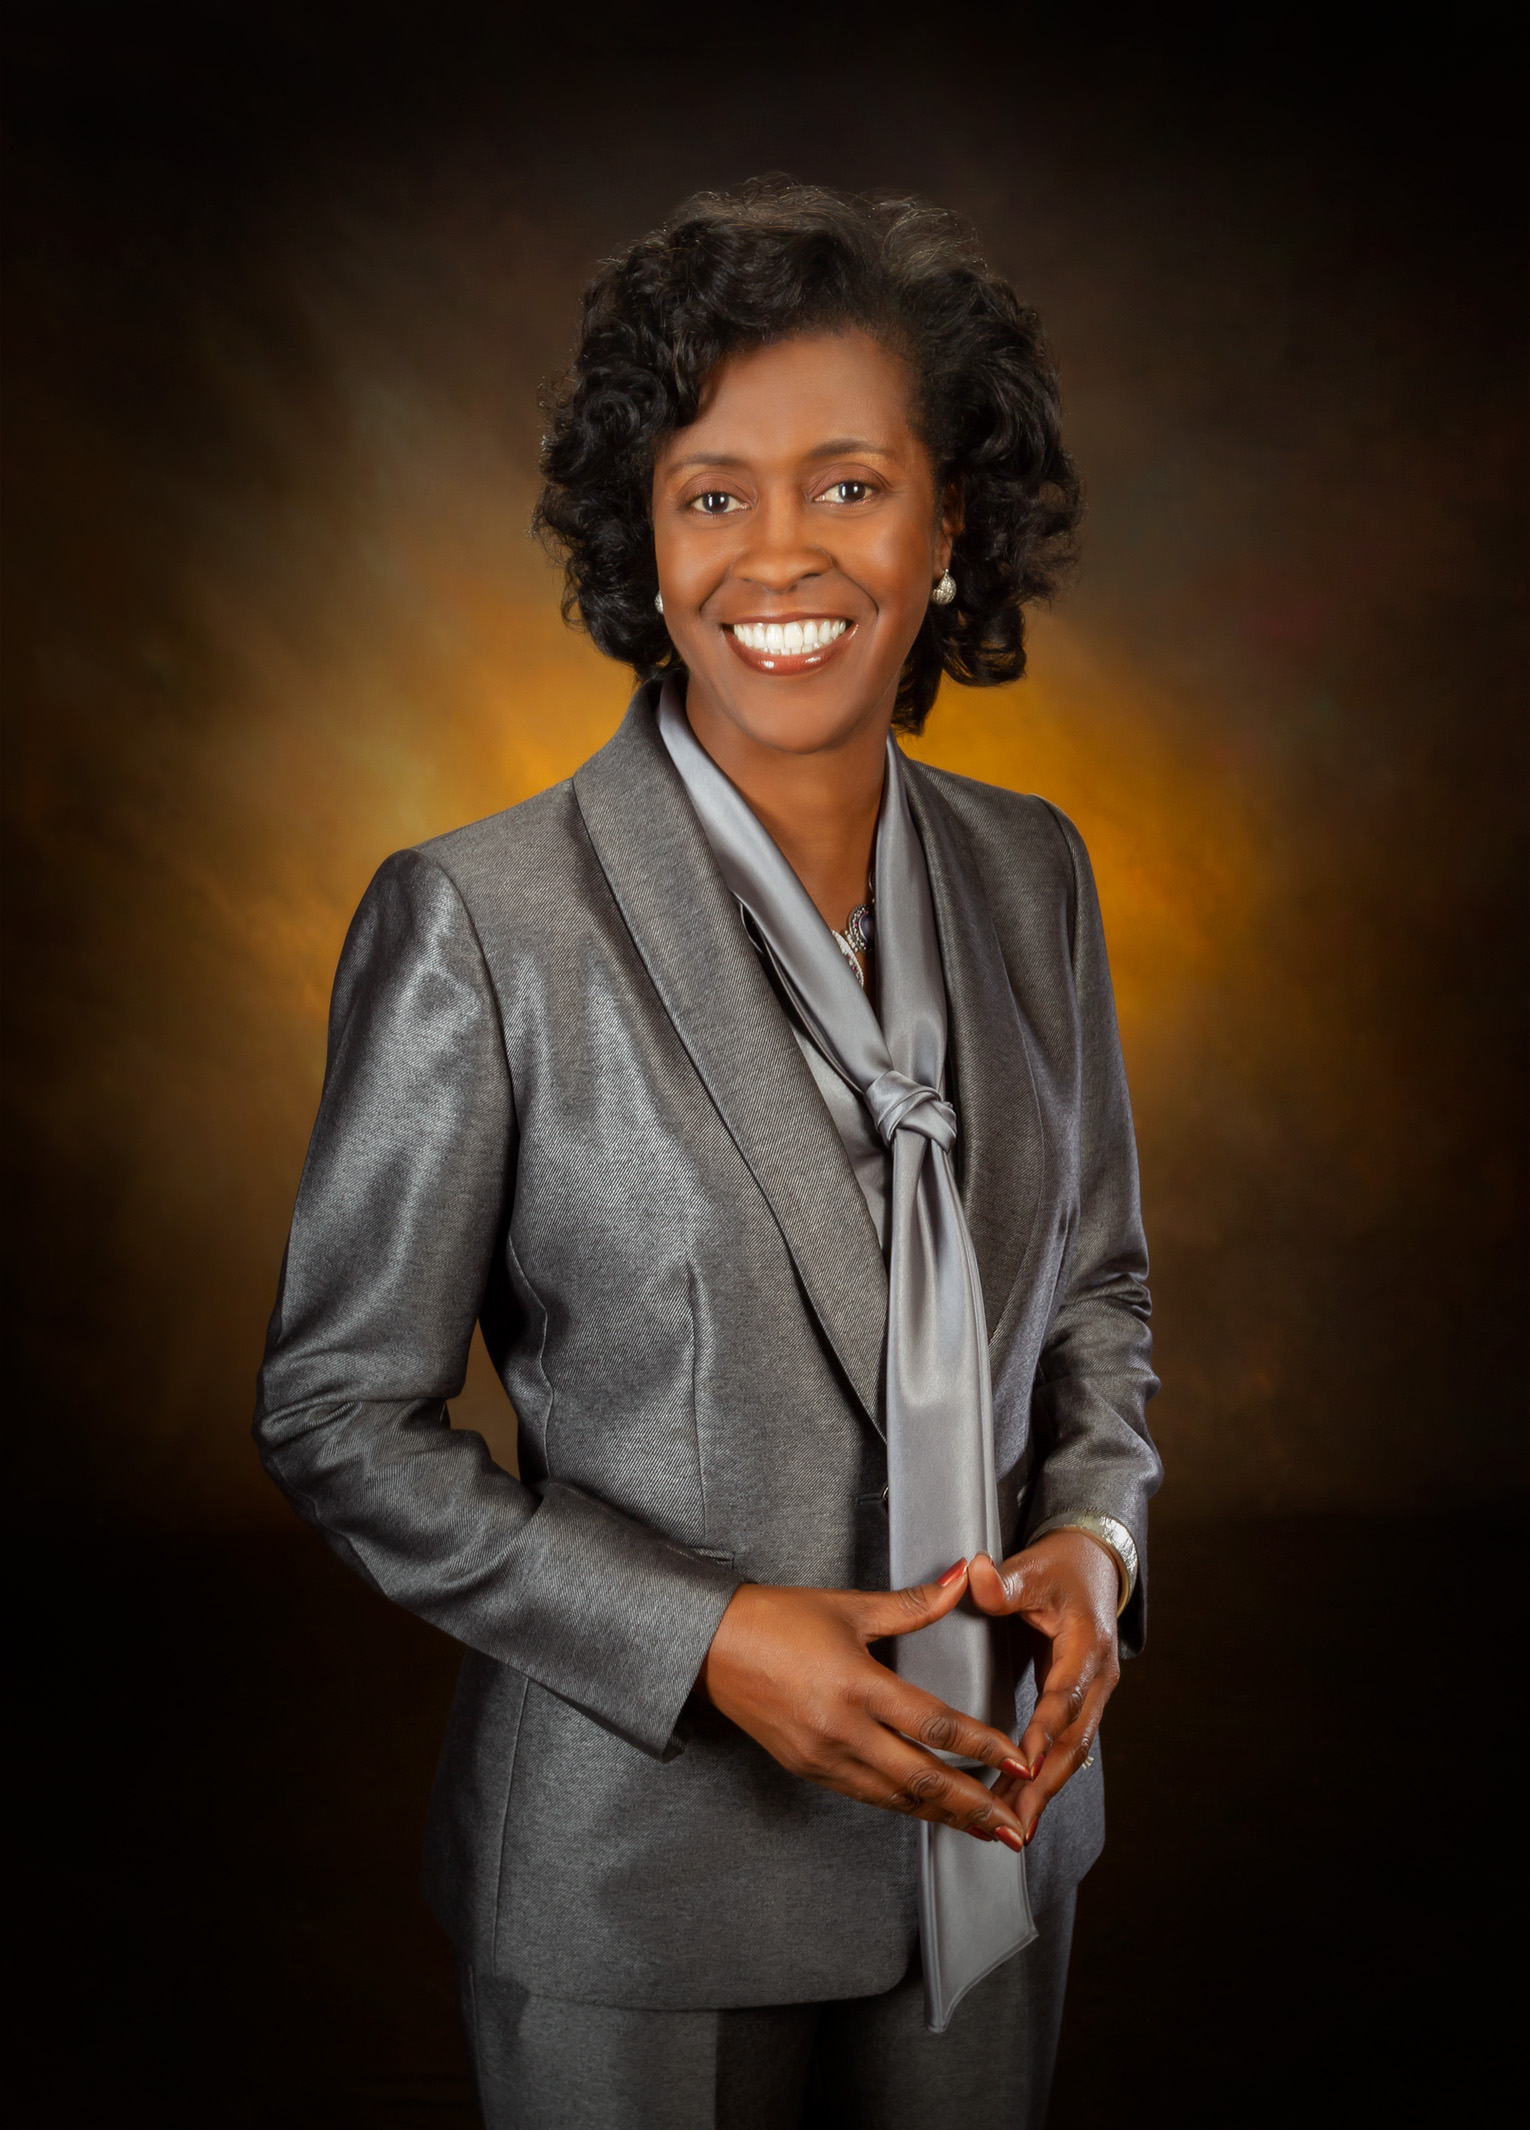 Dr. Adams wears a silver suit and is standing in front of a blurred brown background. She is looking at the camera and smiling.